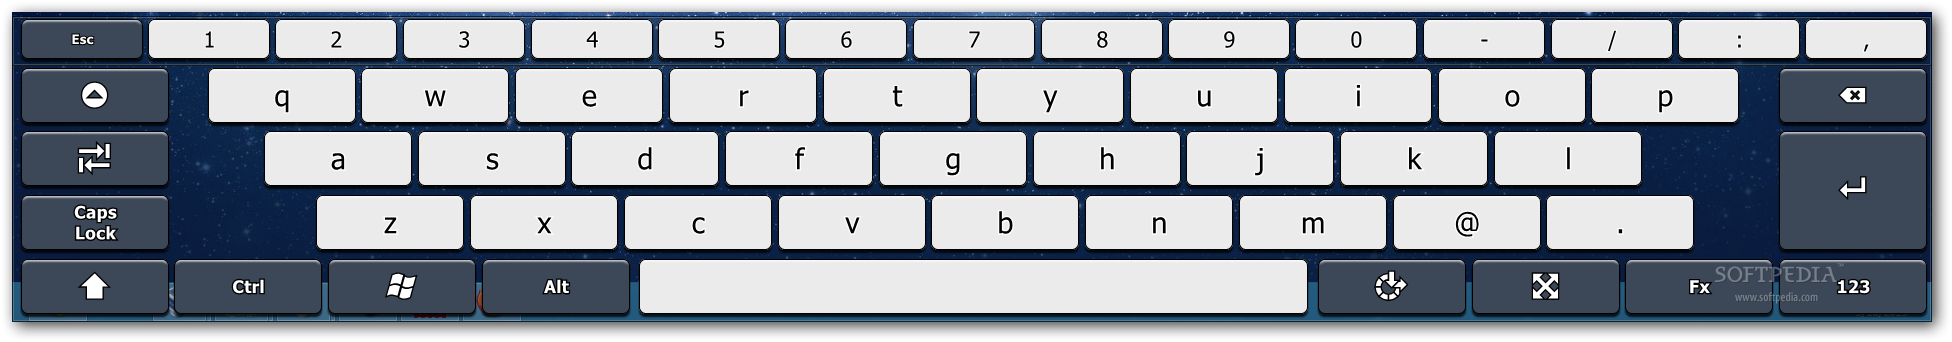 Touch-It screenshot 1 - The Beta version of the application allows you to view and use the virtual keyboard.